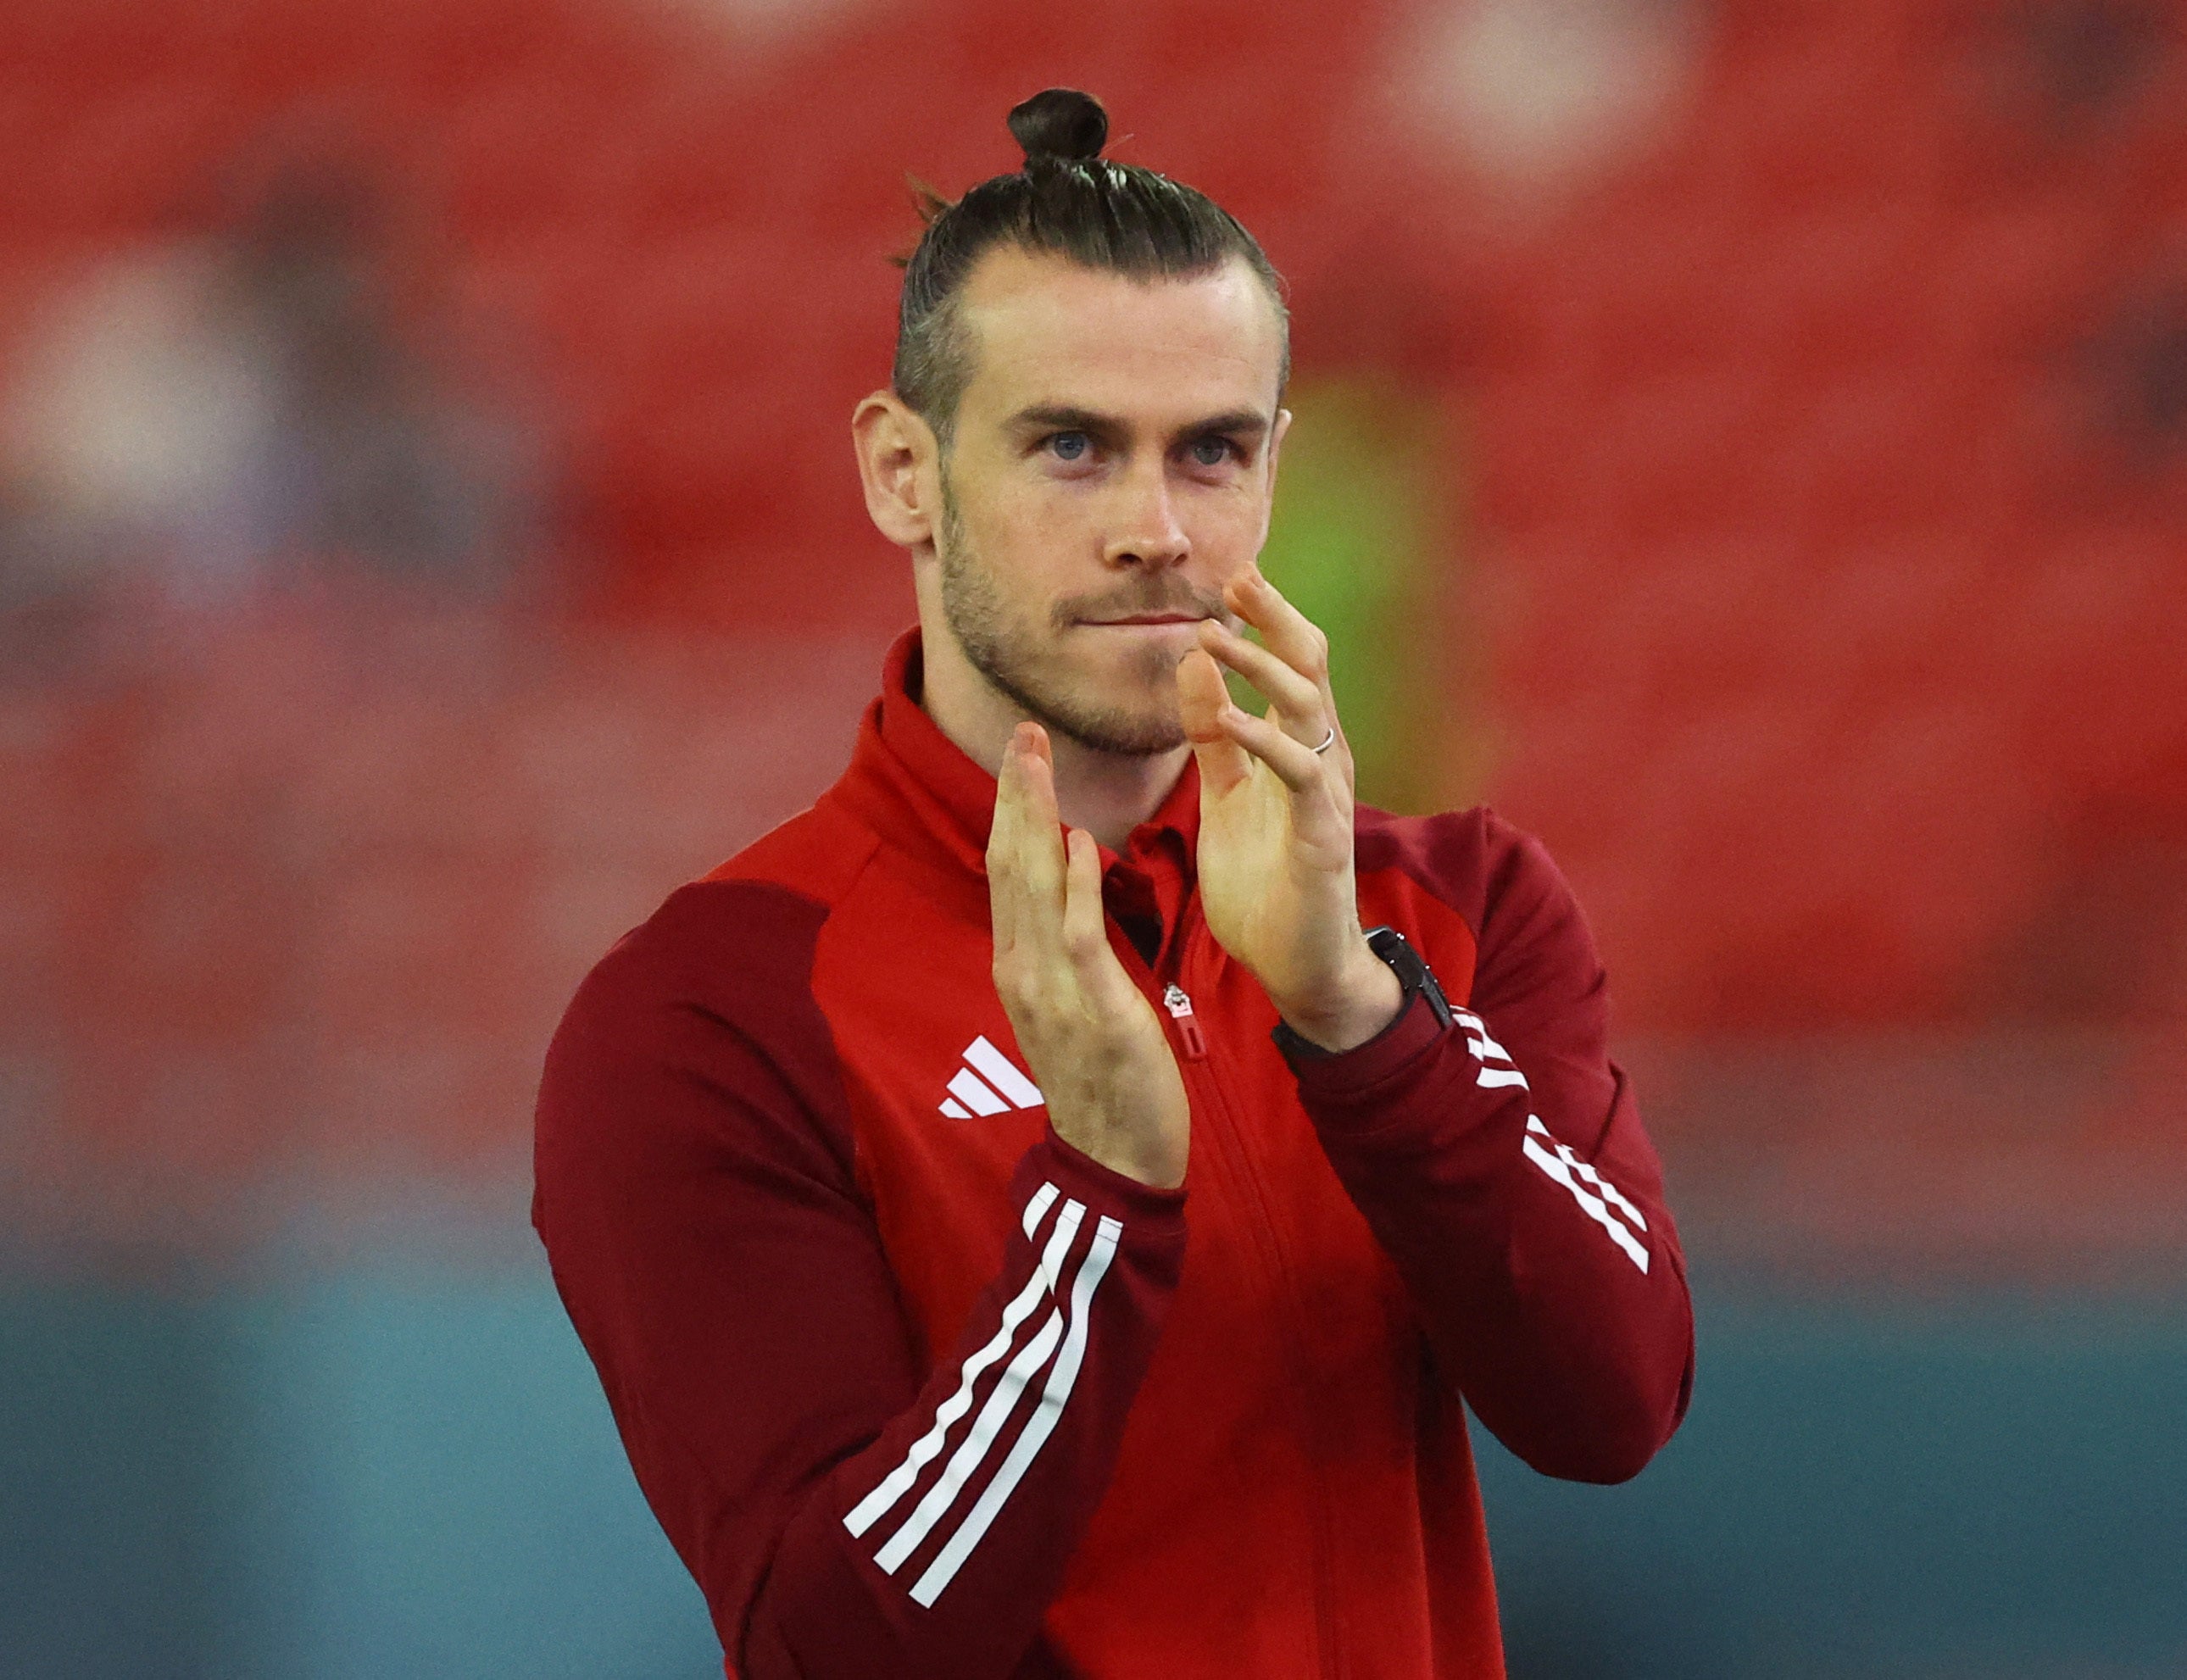 Wales captain and forward Gareth Bale starts against USA